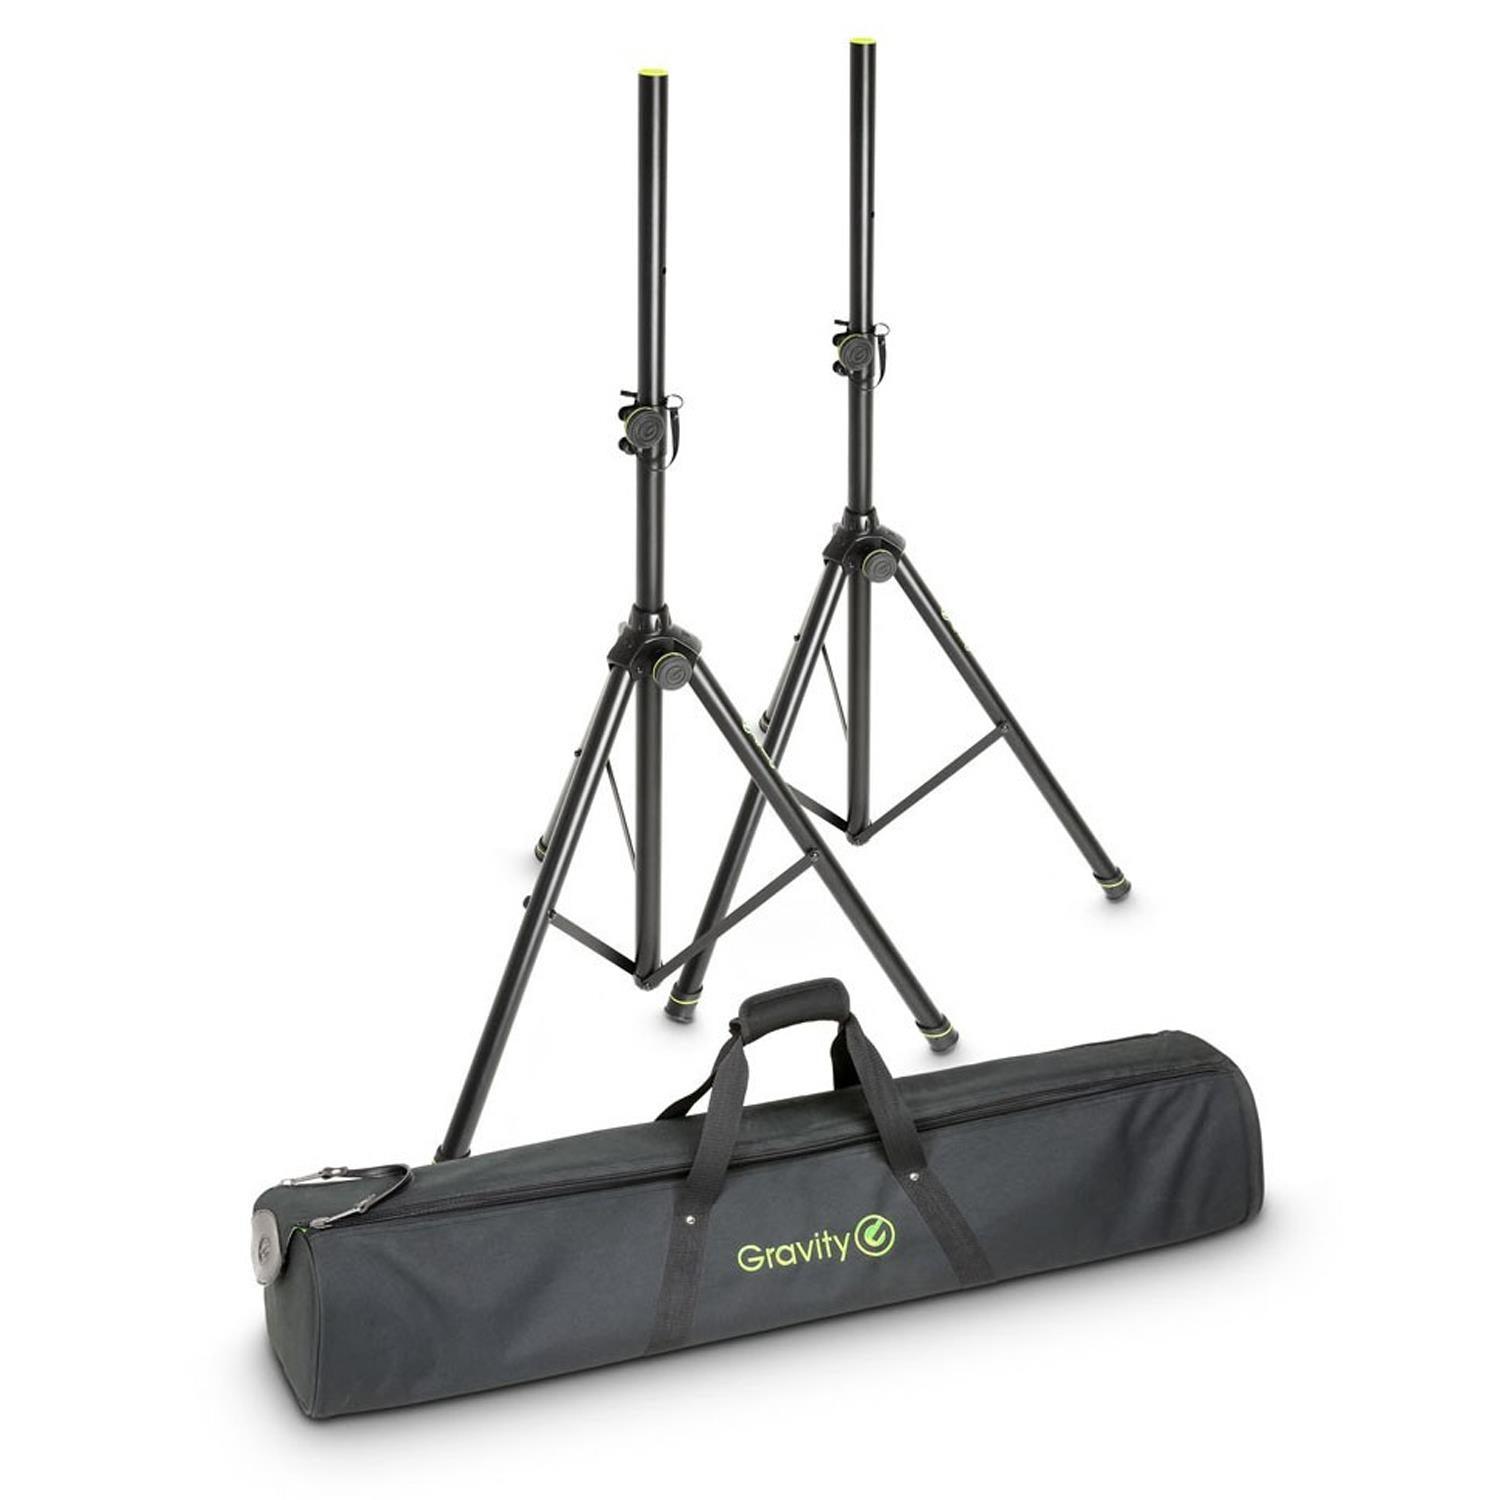 Gravity SS 5212 B SET 1 Speaker Stand Set with Carry Bag - DY Pro Audio